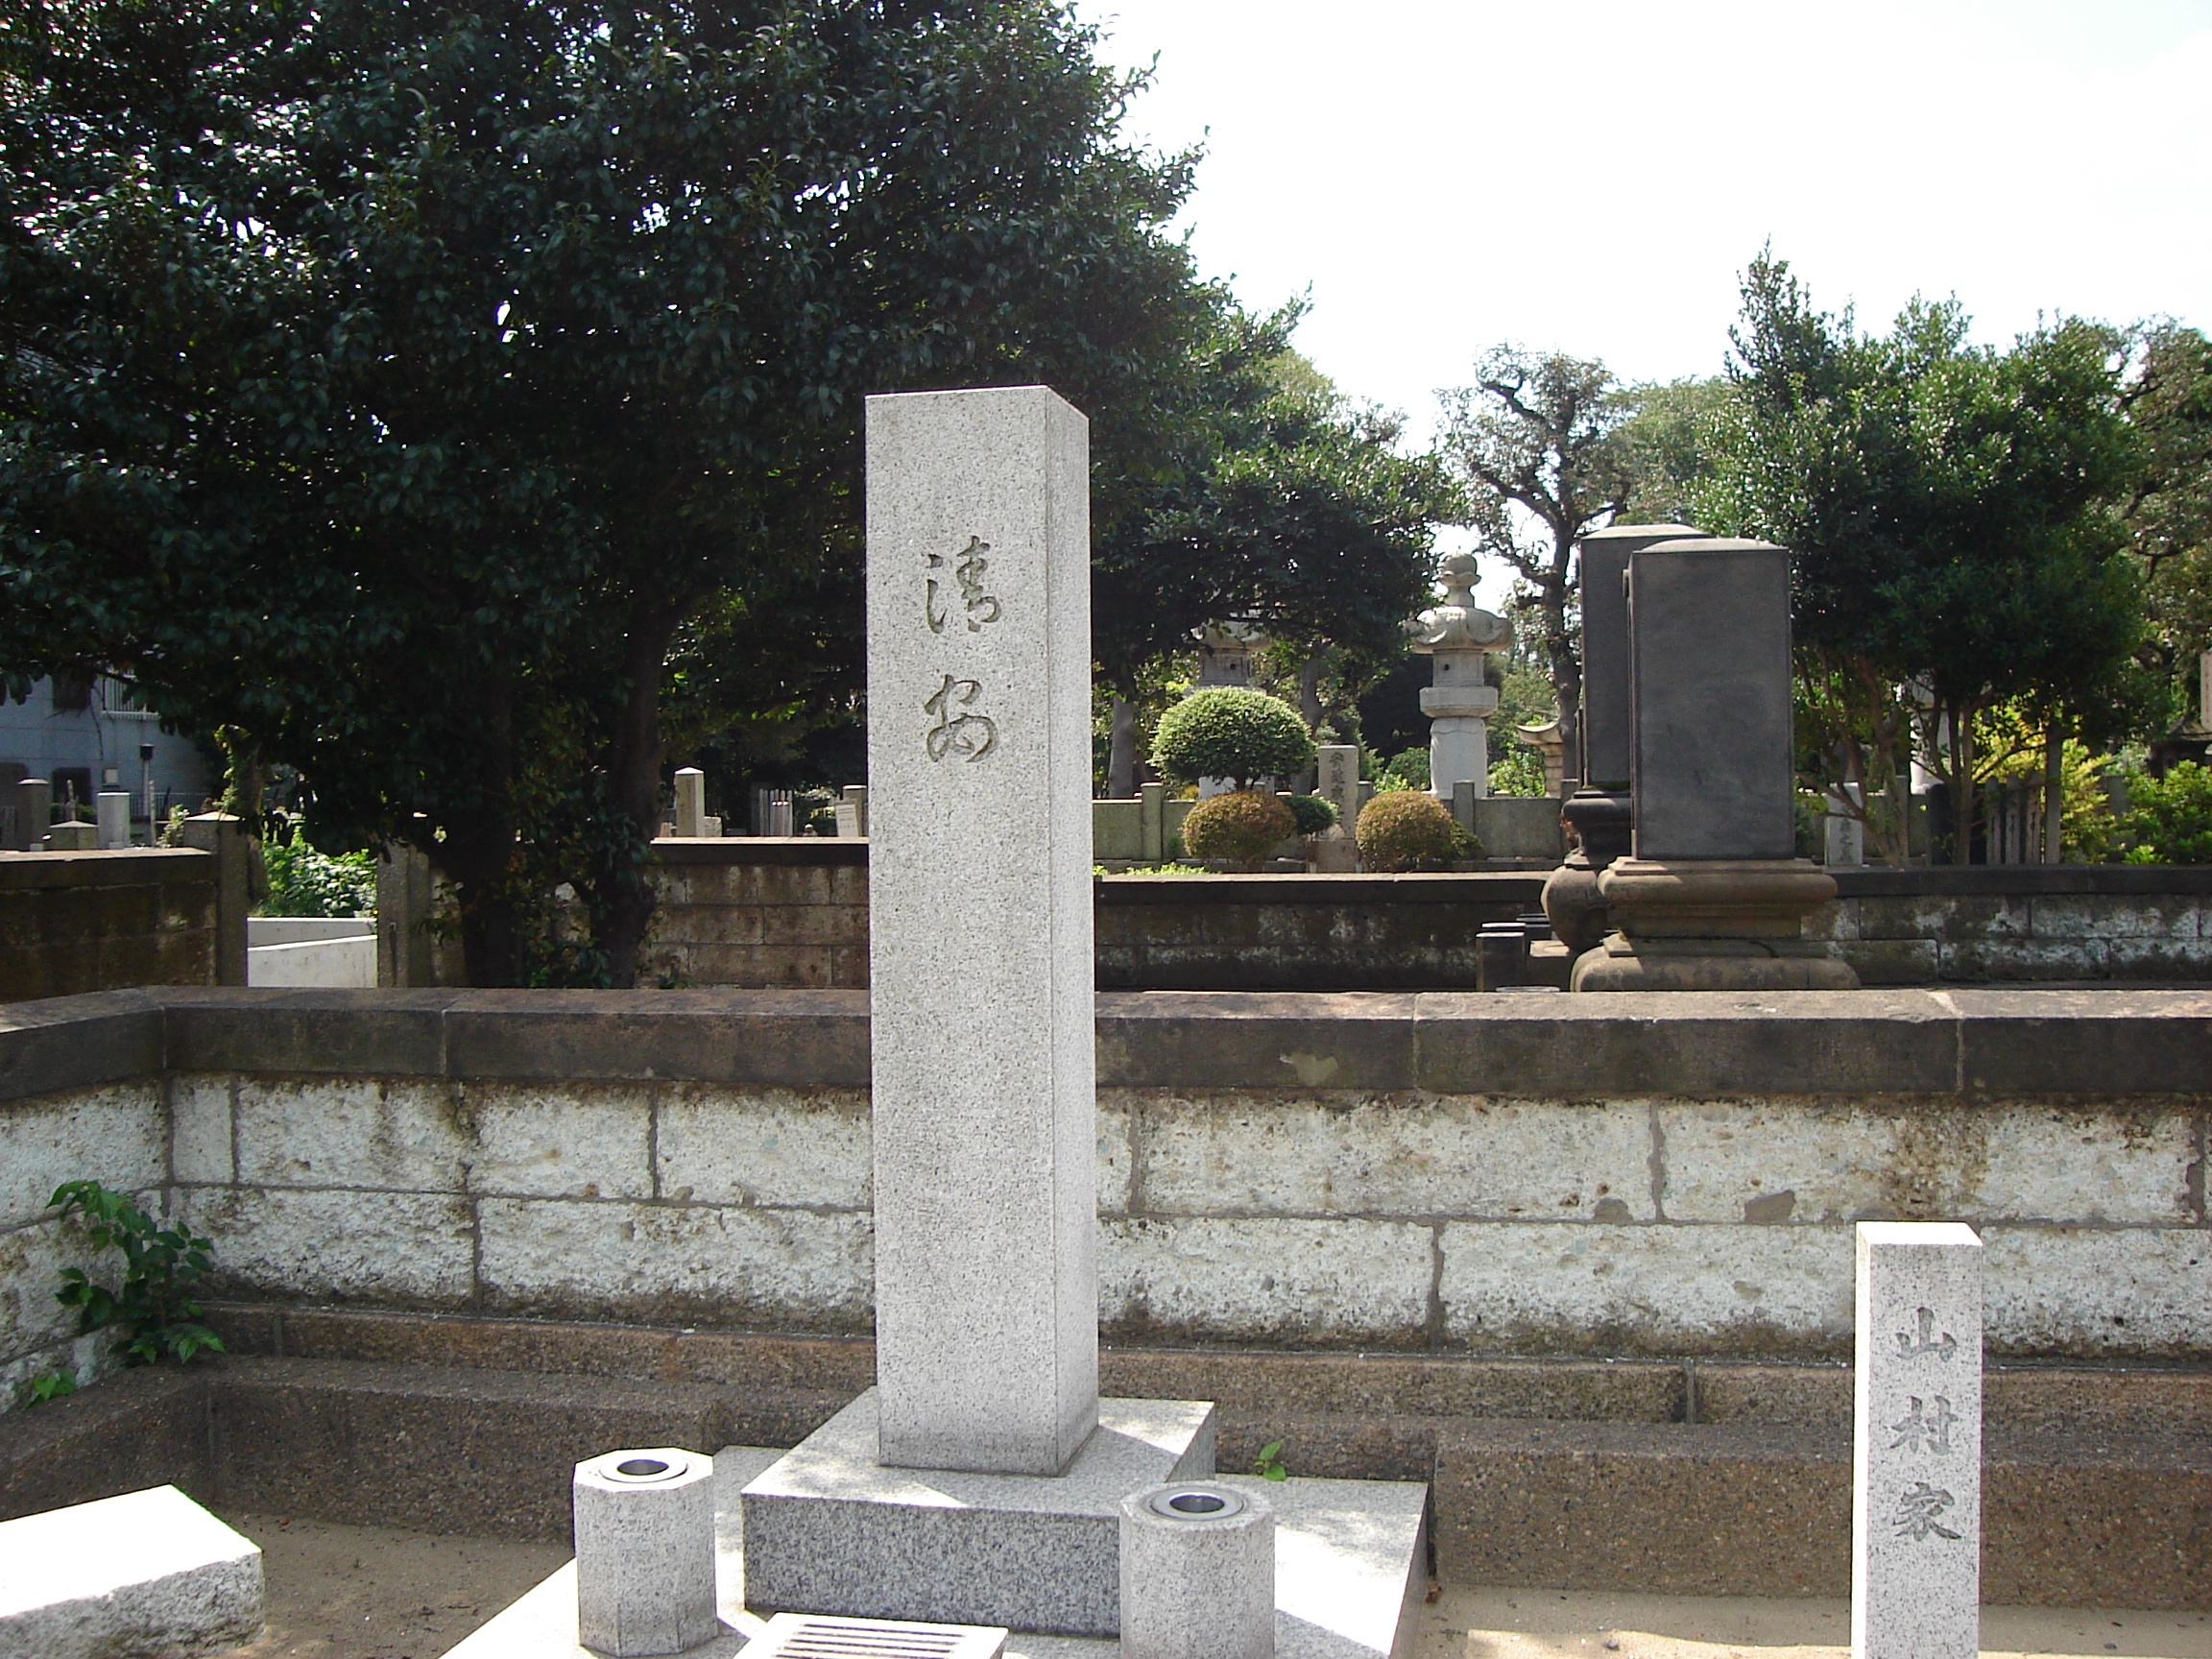 a tall rectangular gravestone engraved with japanese characters